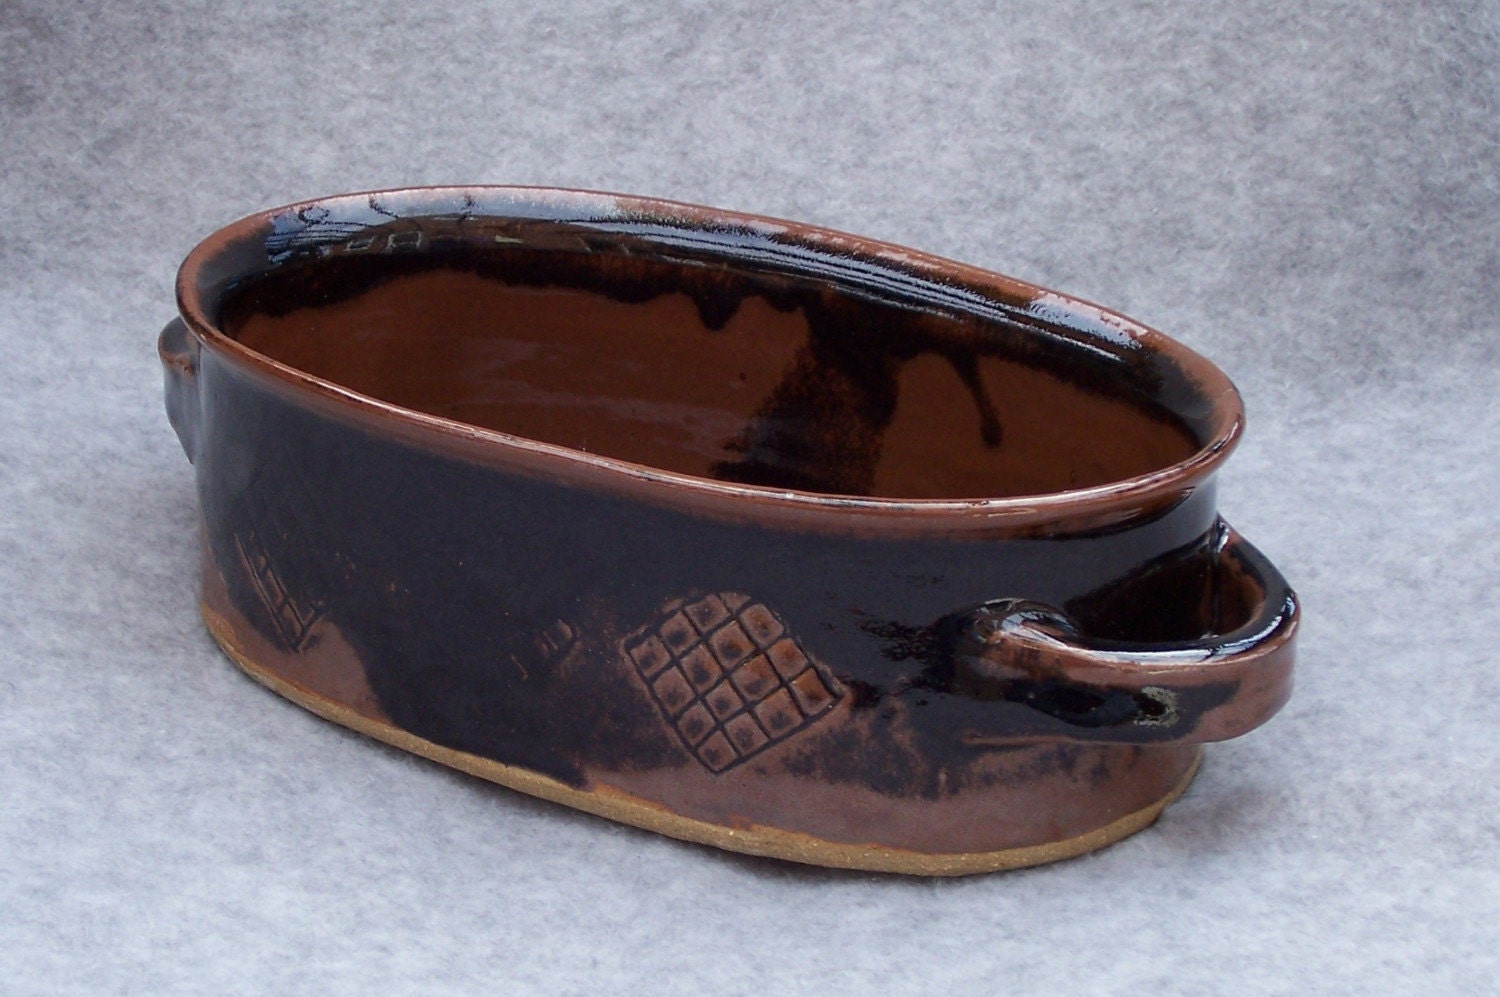 Oval Ceramic Casserole Dish in Brown and Black Serving ...